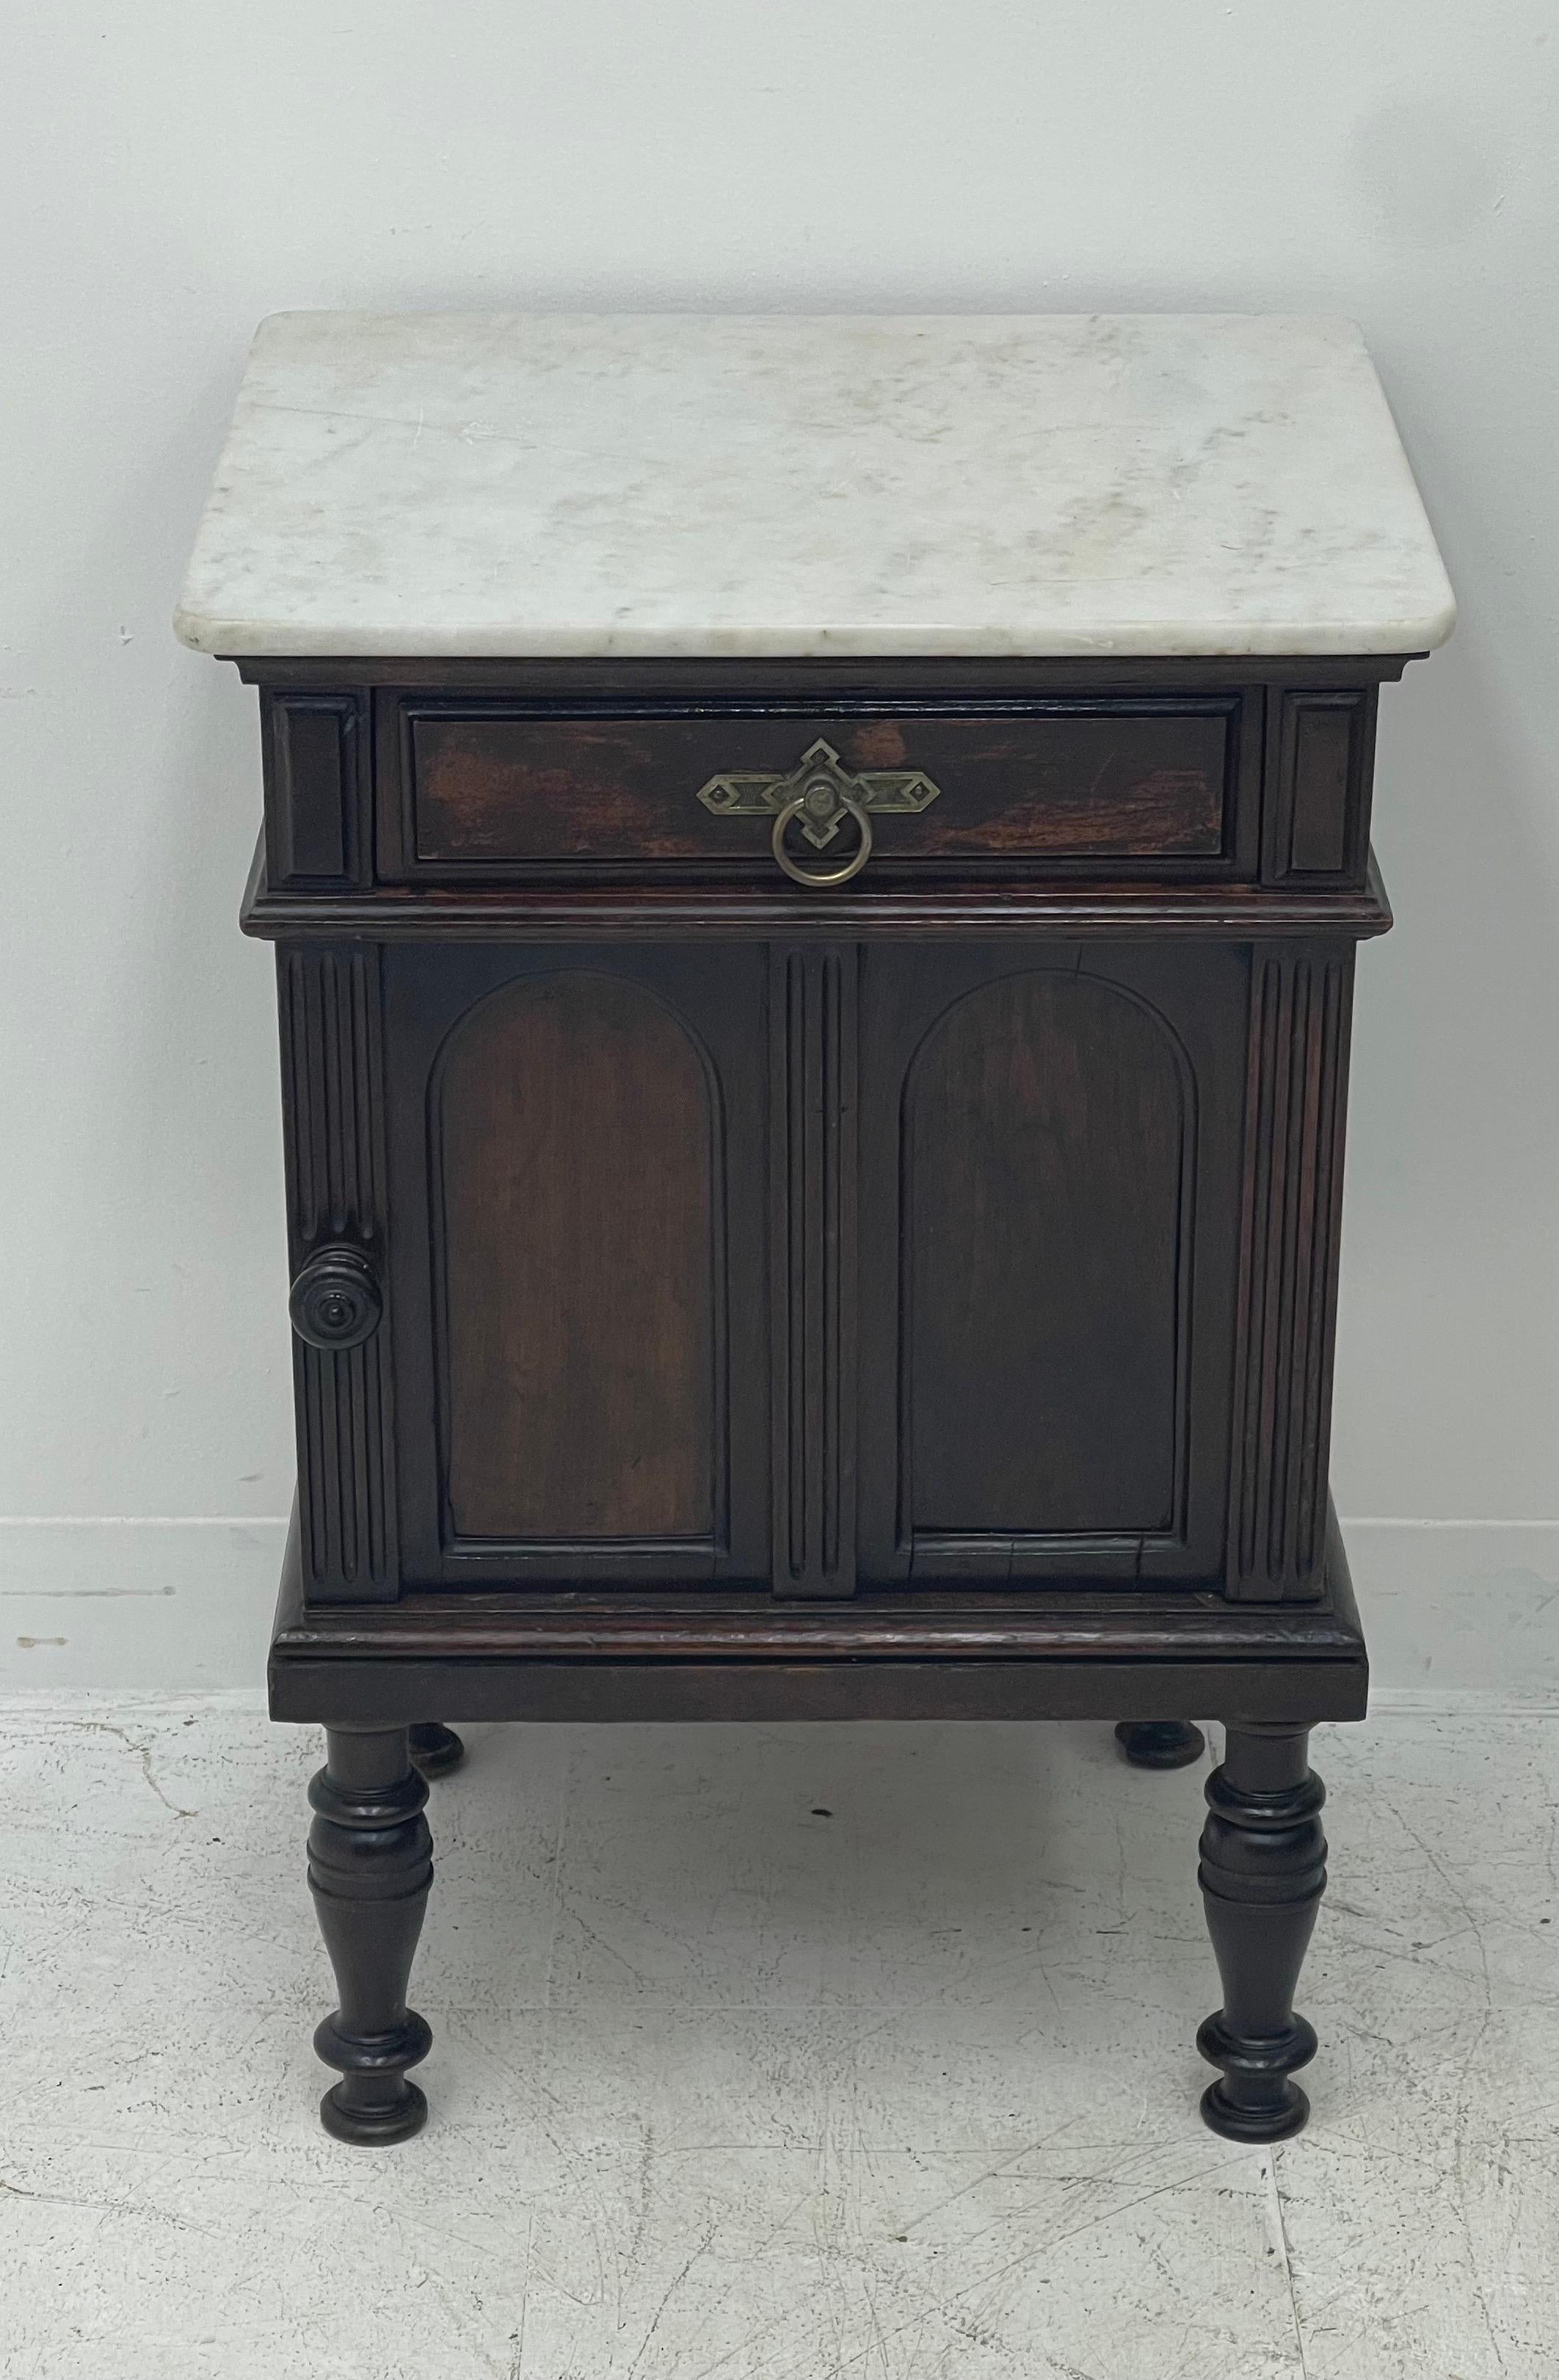 This is an antique bedside cabinet, an English, Arts and Crafts, Maple and Co., cupboard. A nightstand in mahogany dating to the late 19th century, circa 1890. 
In good proportion and classic Maple and Co, Arts and Crafts styling. Select mahogany